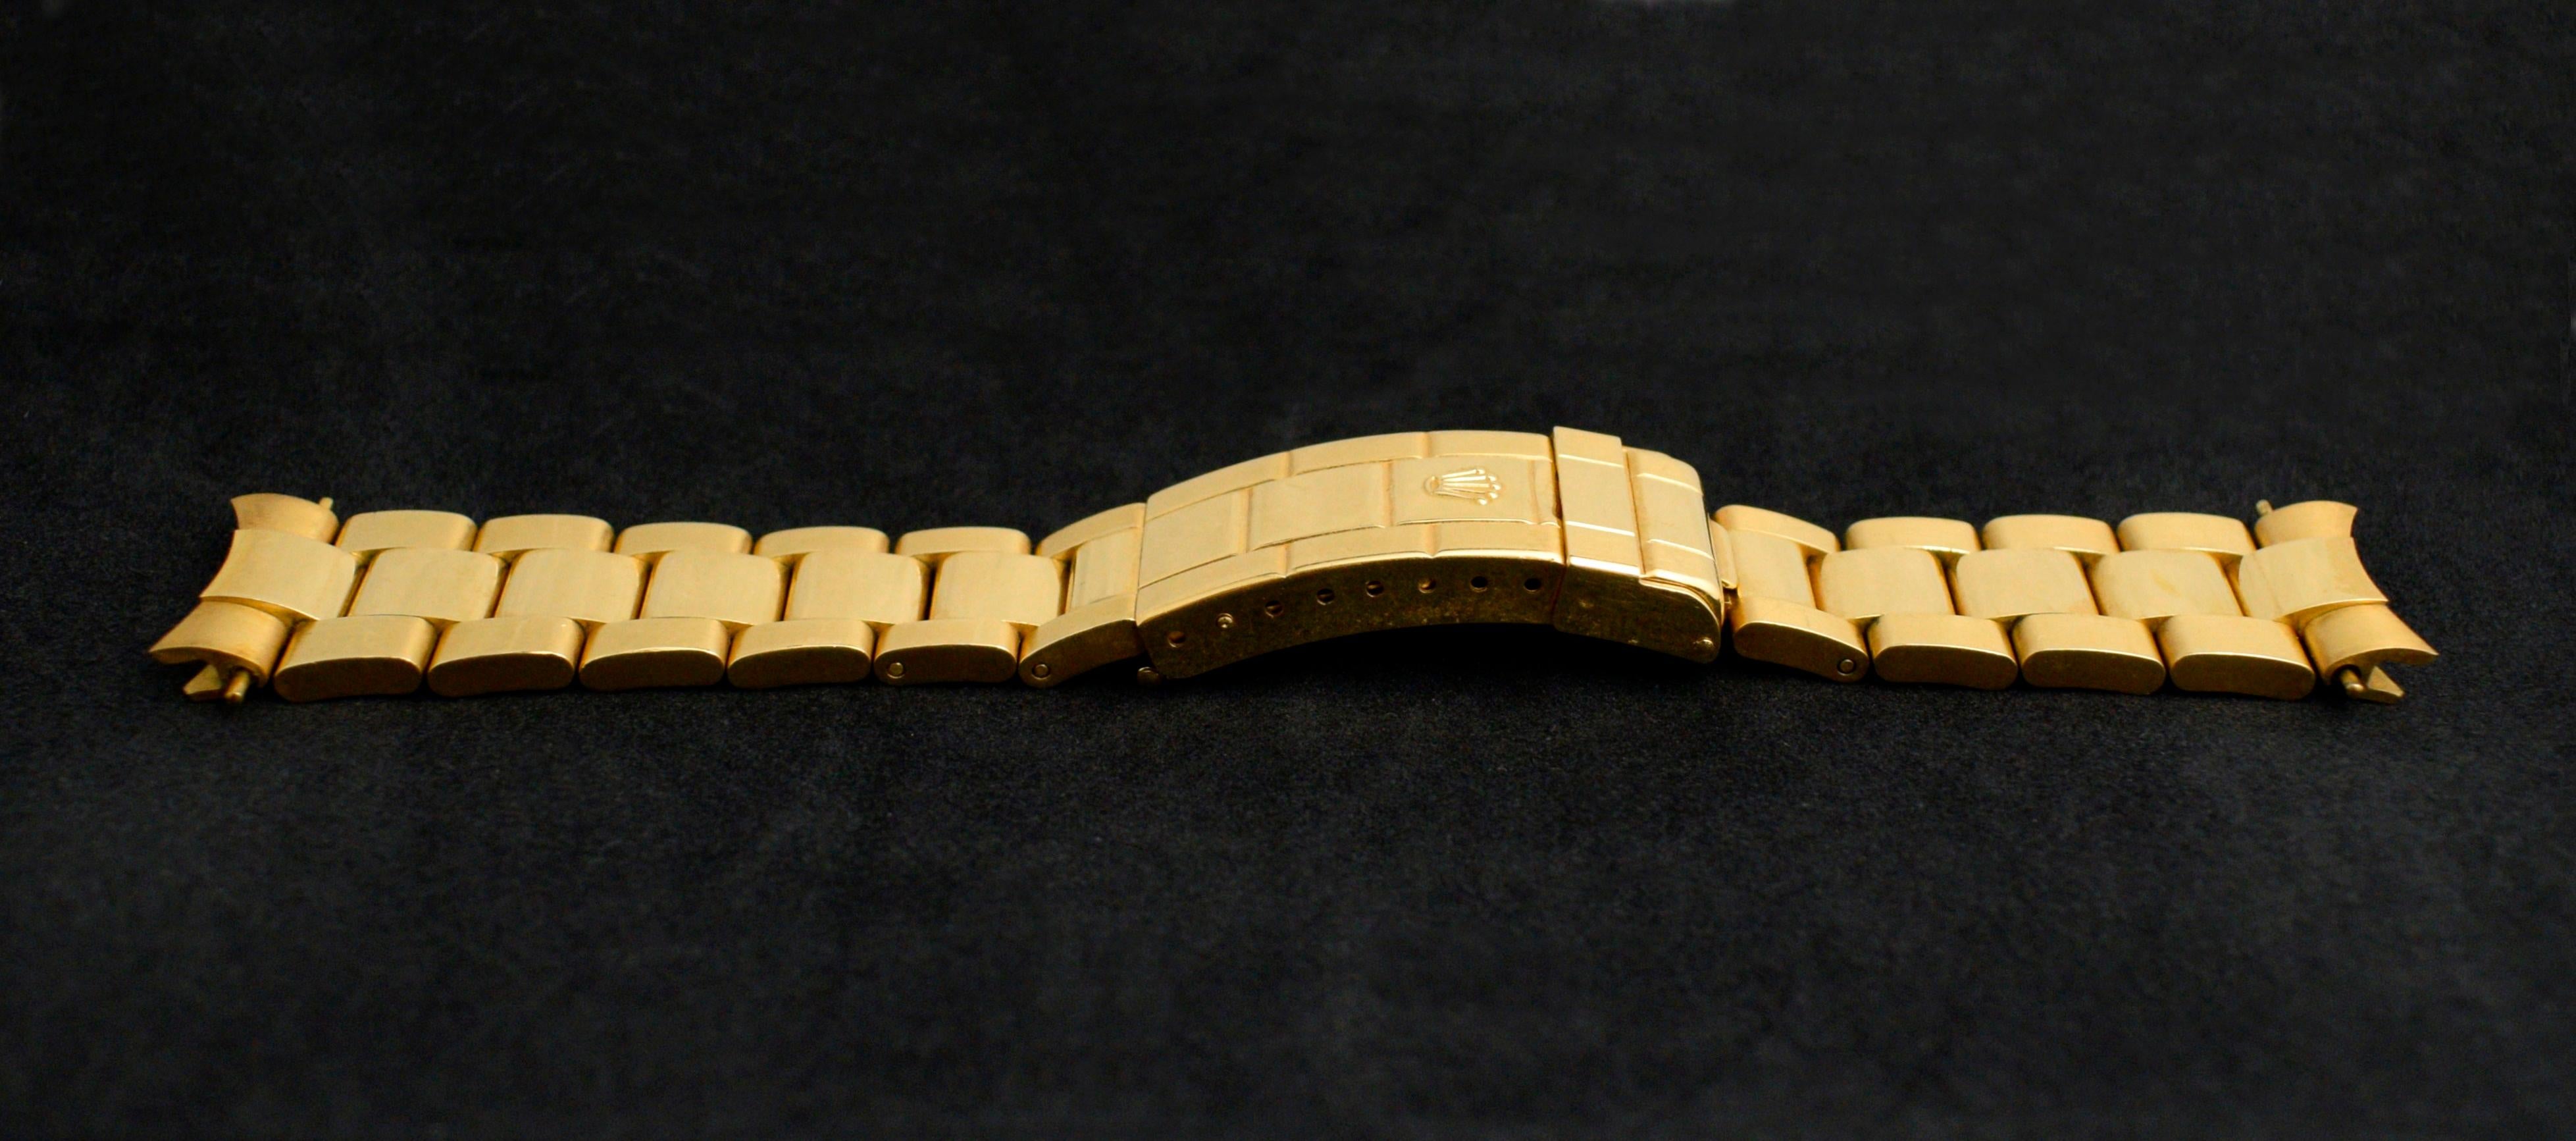 Rolex Submariner 18k Yellow Gold Blue Lapis Dial 16618 Automatic Watch, 1990 For Sale 2